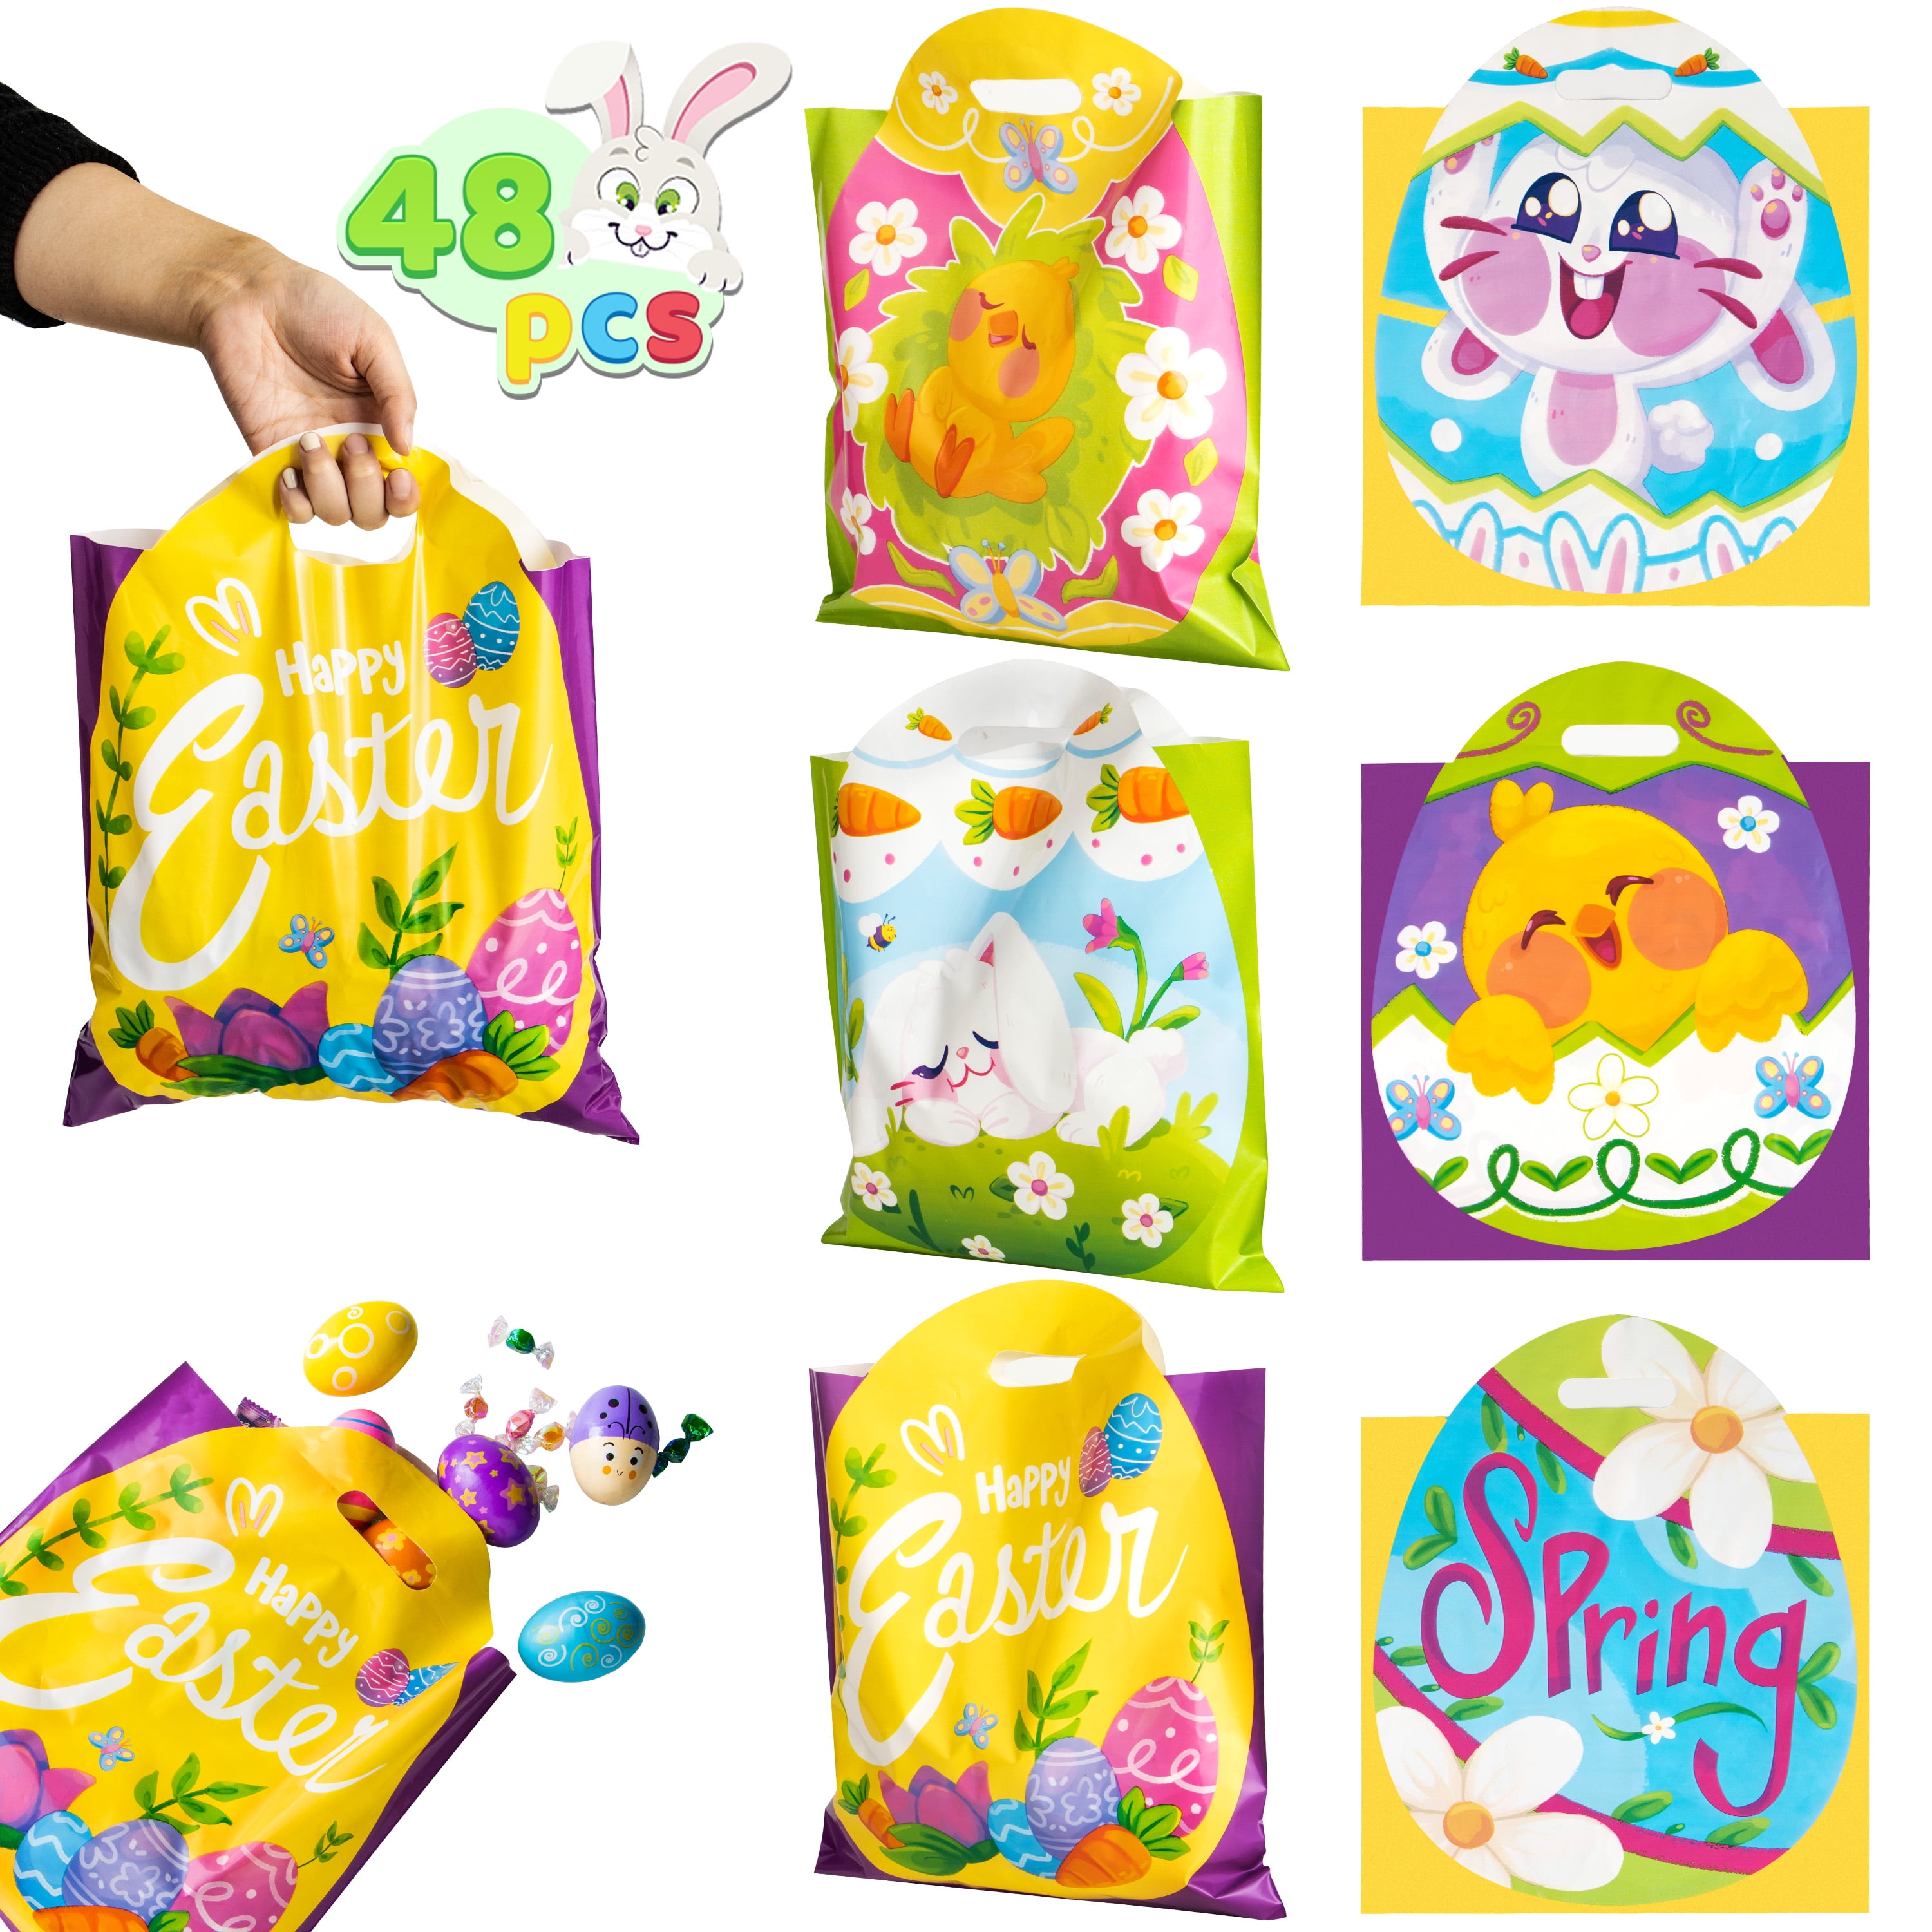 Syncfun 48 Pcs Easter Gift PE Bags for Kids, Large Easter Treat Tote ...